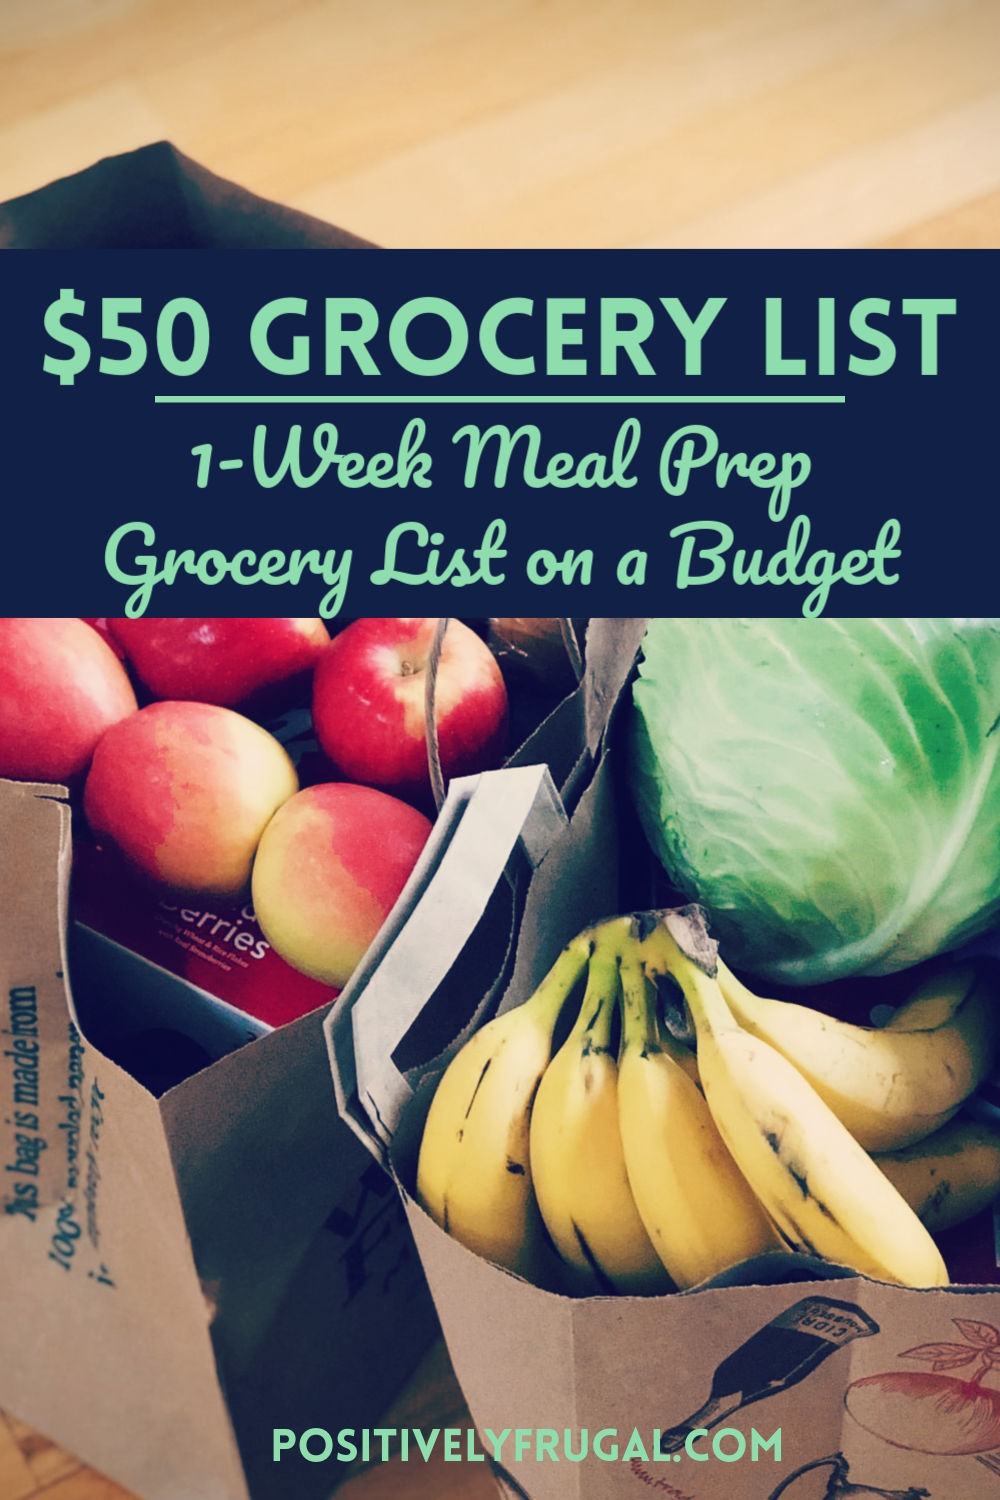 50 Grocery List A Meal Prep Grocery List on a Budget Positively Frugal